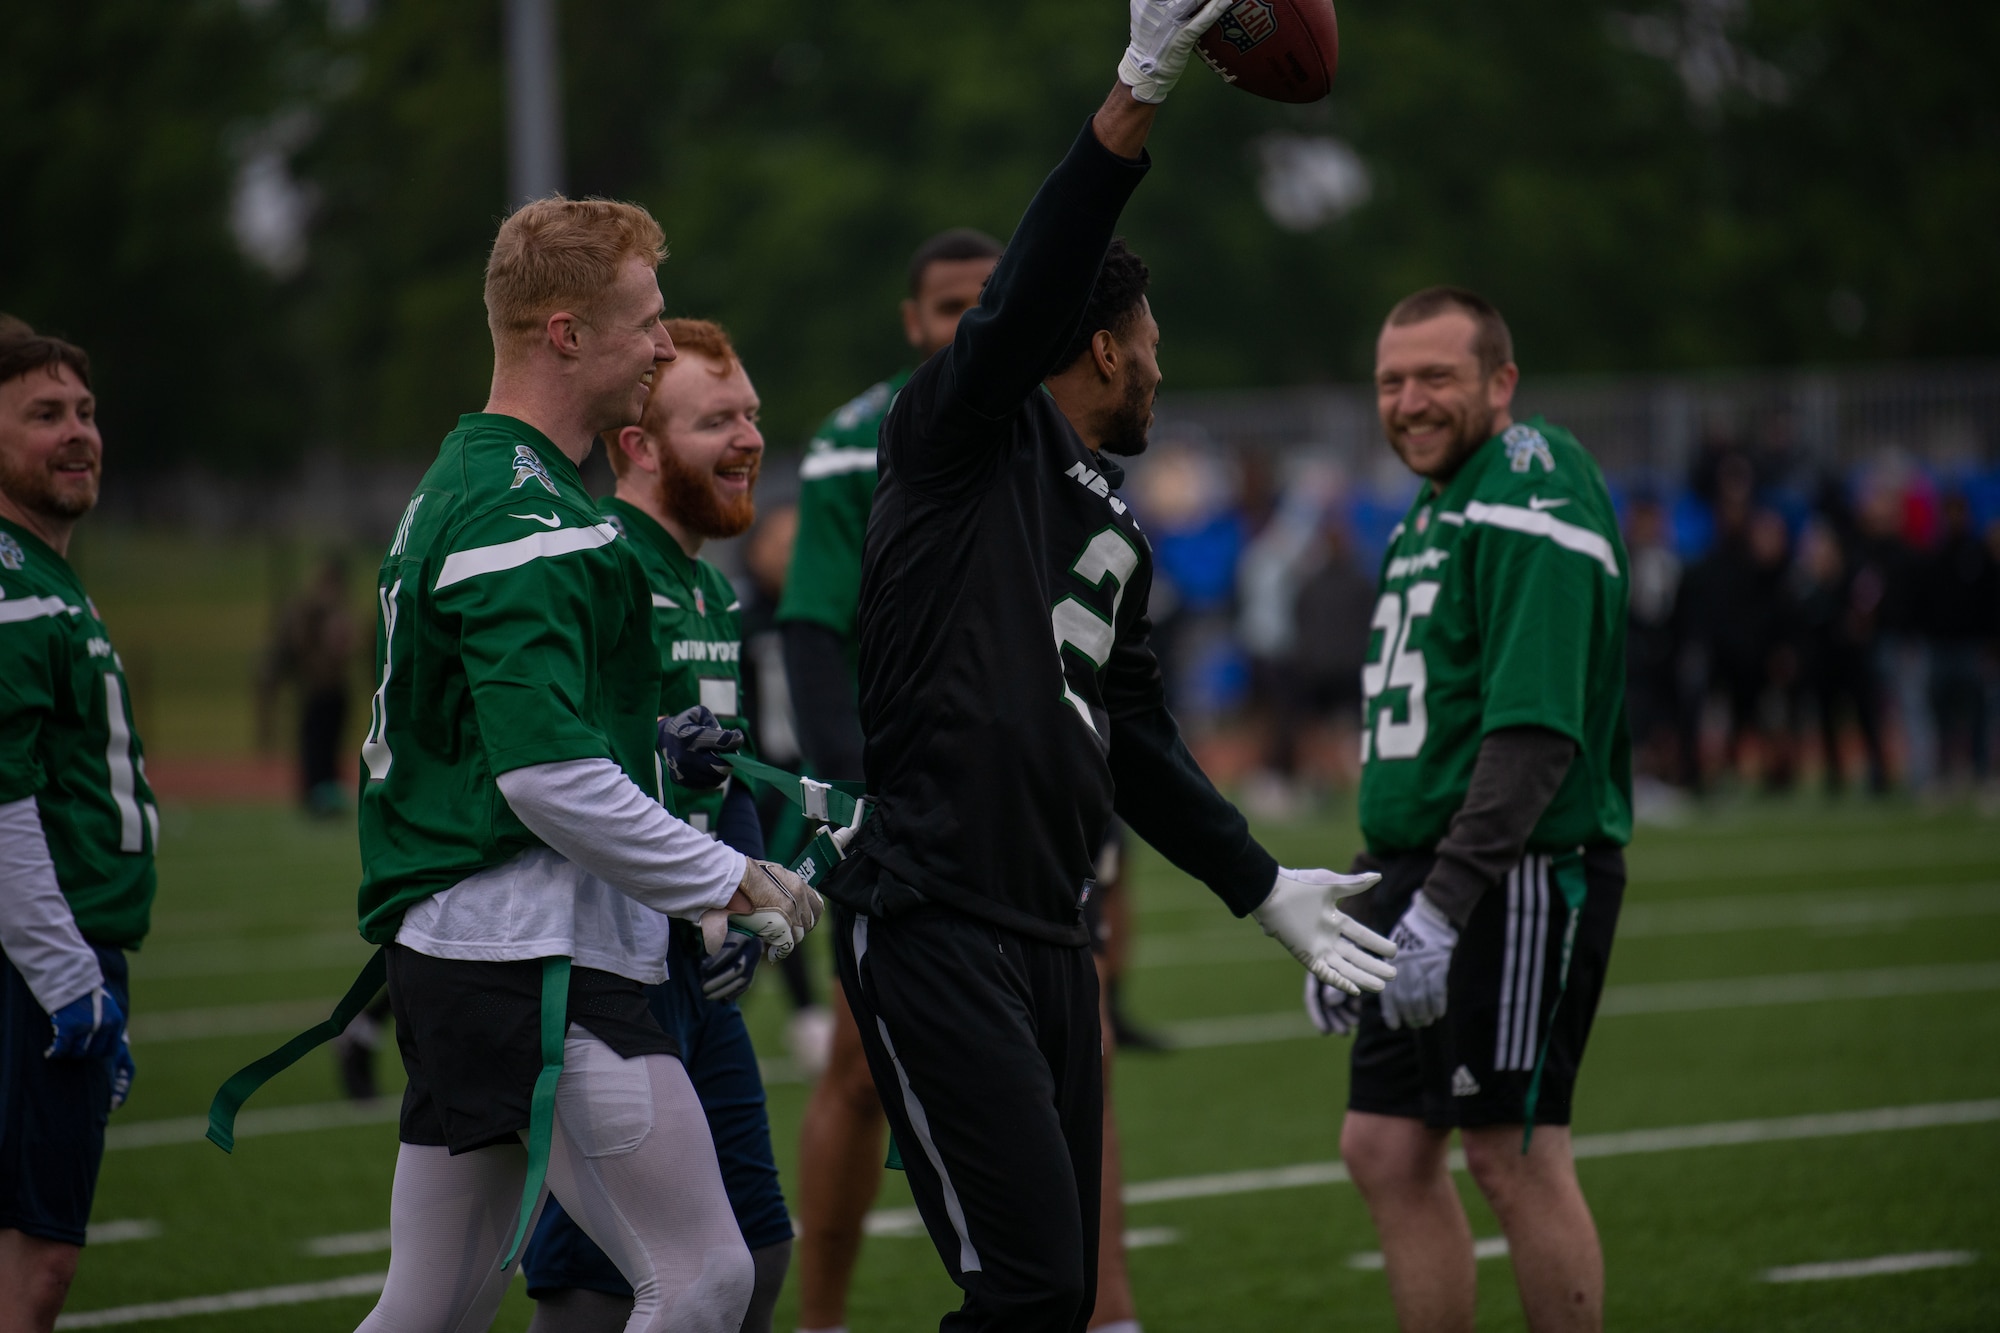 Men celebrating a great play in American Football